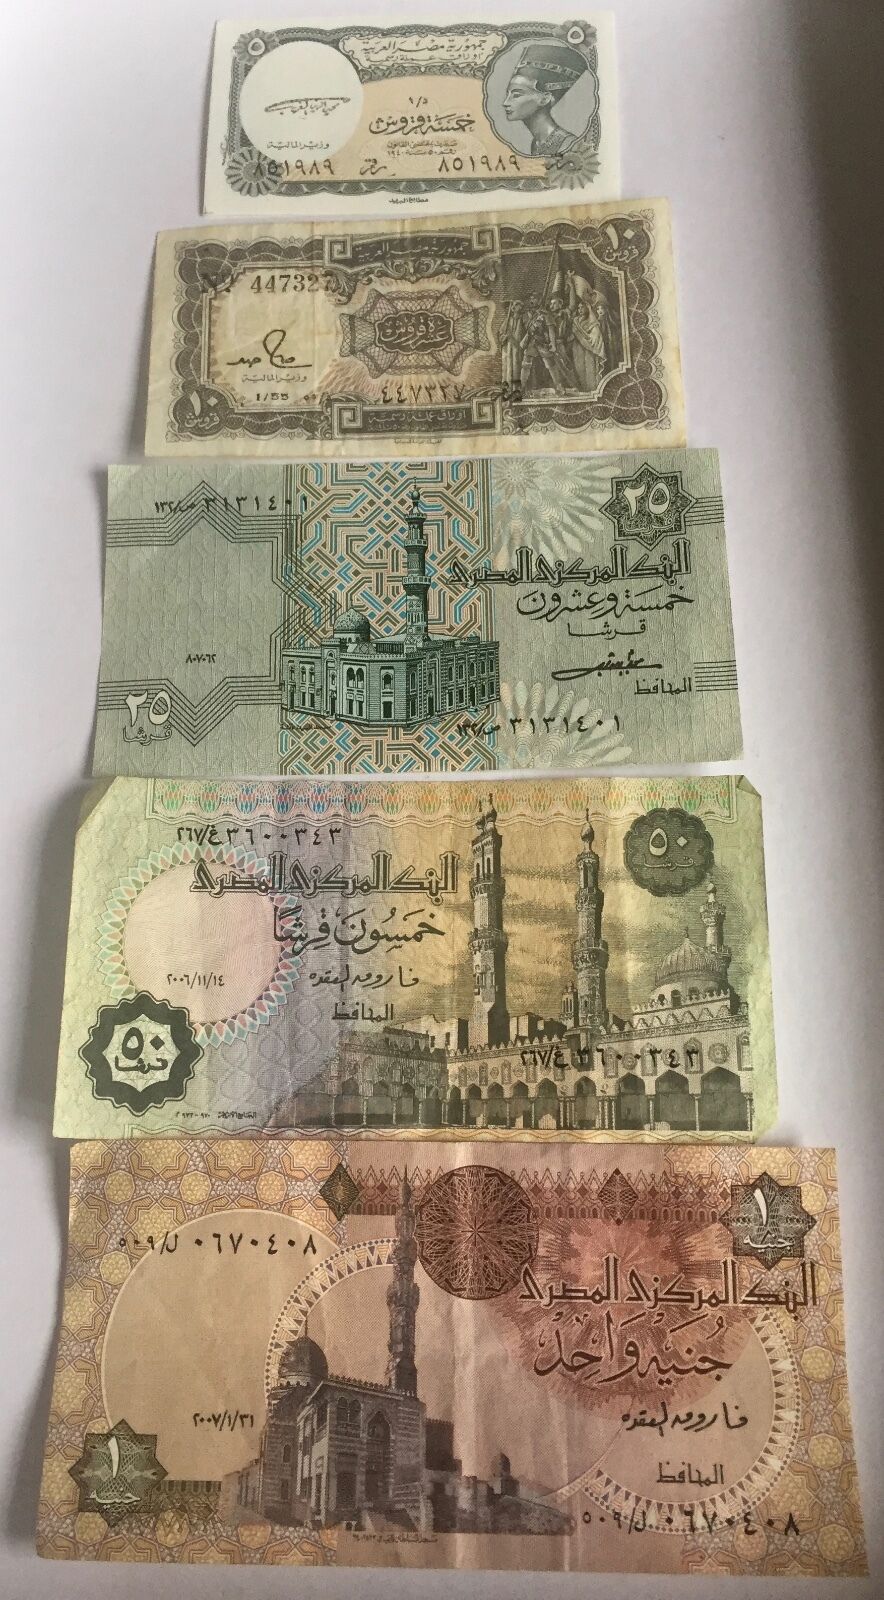 EGYPT  5, 10, 25, 50 Piasters, and 1 Pound - Set of 5 Egyptian Banknotes  UNC